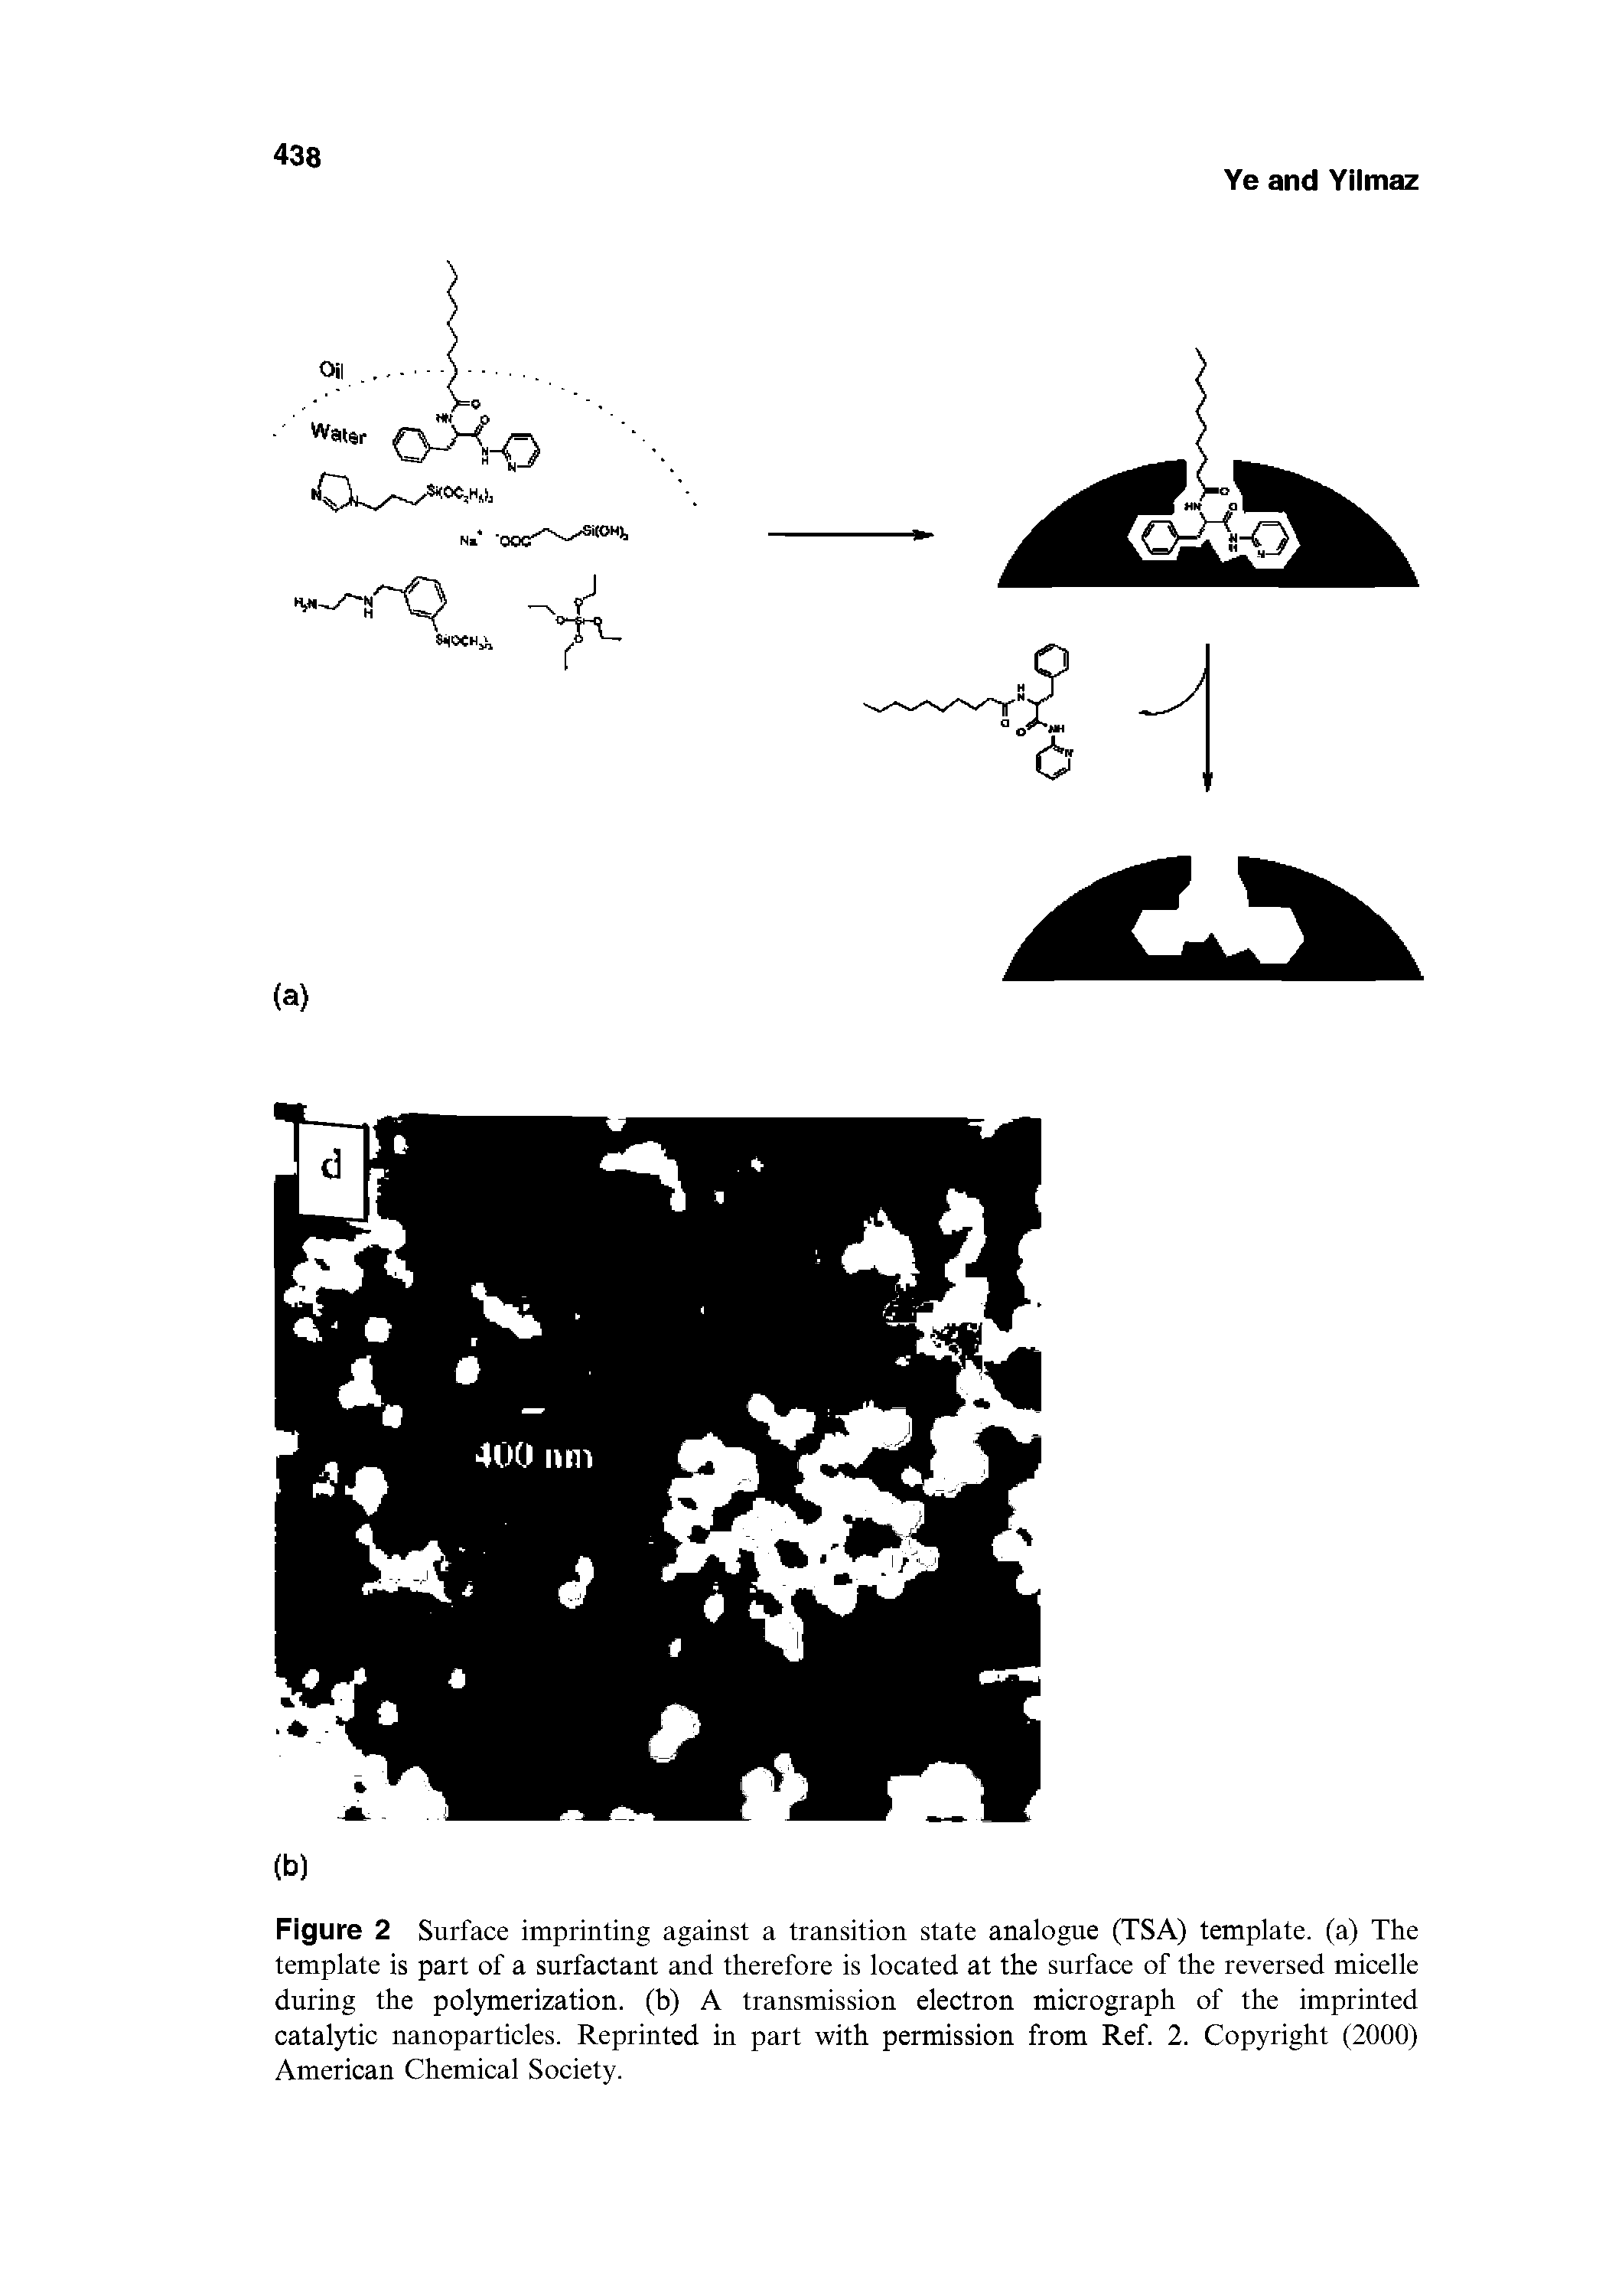 Figure 2 Surface imprinting against a transition state analogue (TSA) template, (a) The template is part of a surfactant and therefore is located at the surface of the reversed micelle during the polymerization, (b) A transmission electron micrograph of the imprinted catalytic nanoparticles. Reprinted in part with permission from Ref. 2. Copyright (2000) American Chemical Society.